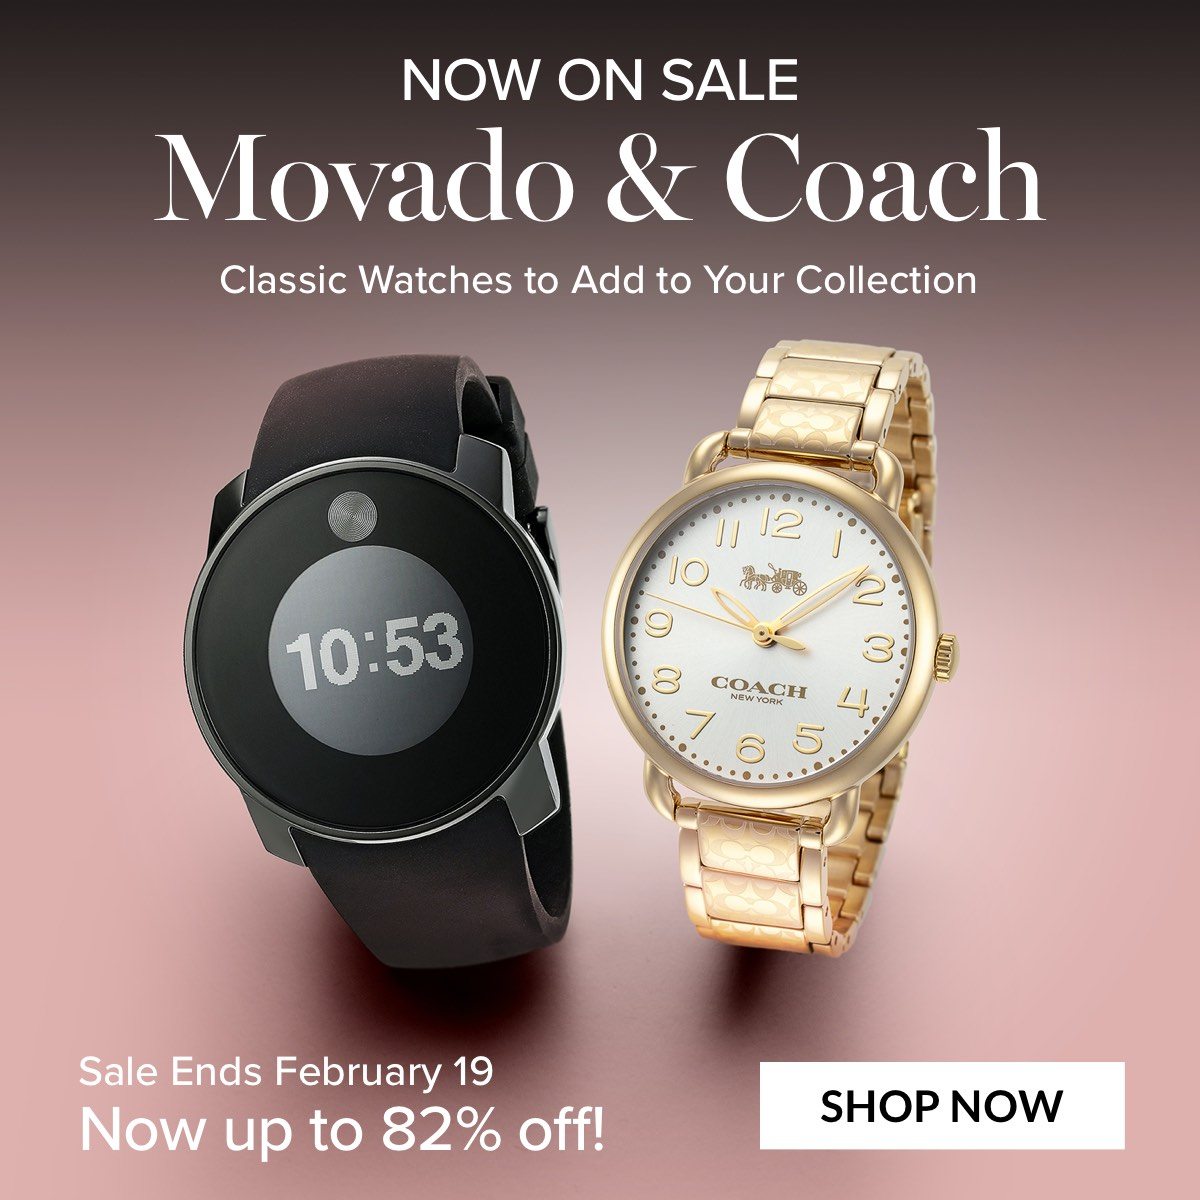 NOW ON SALE: Movado & Coach Classic Watches to Add to Your Collection Up to 82% off! Ends February 19